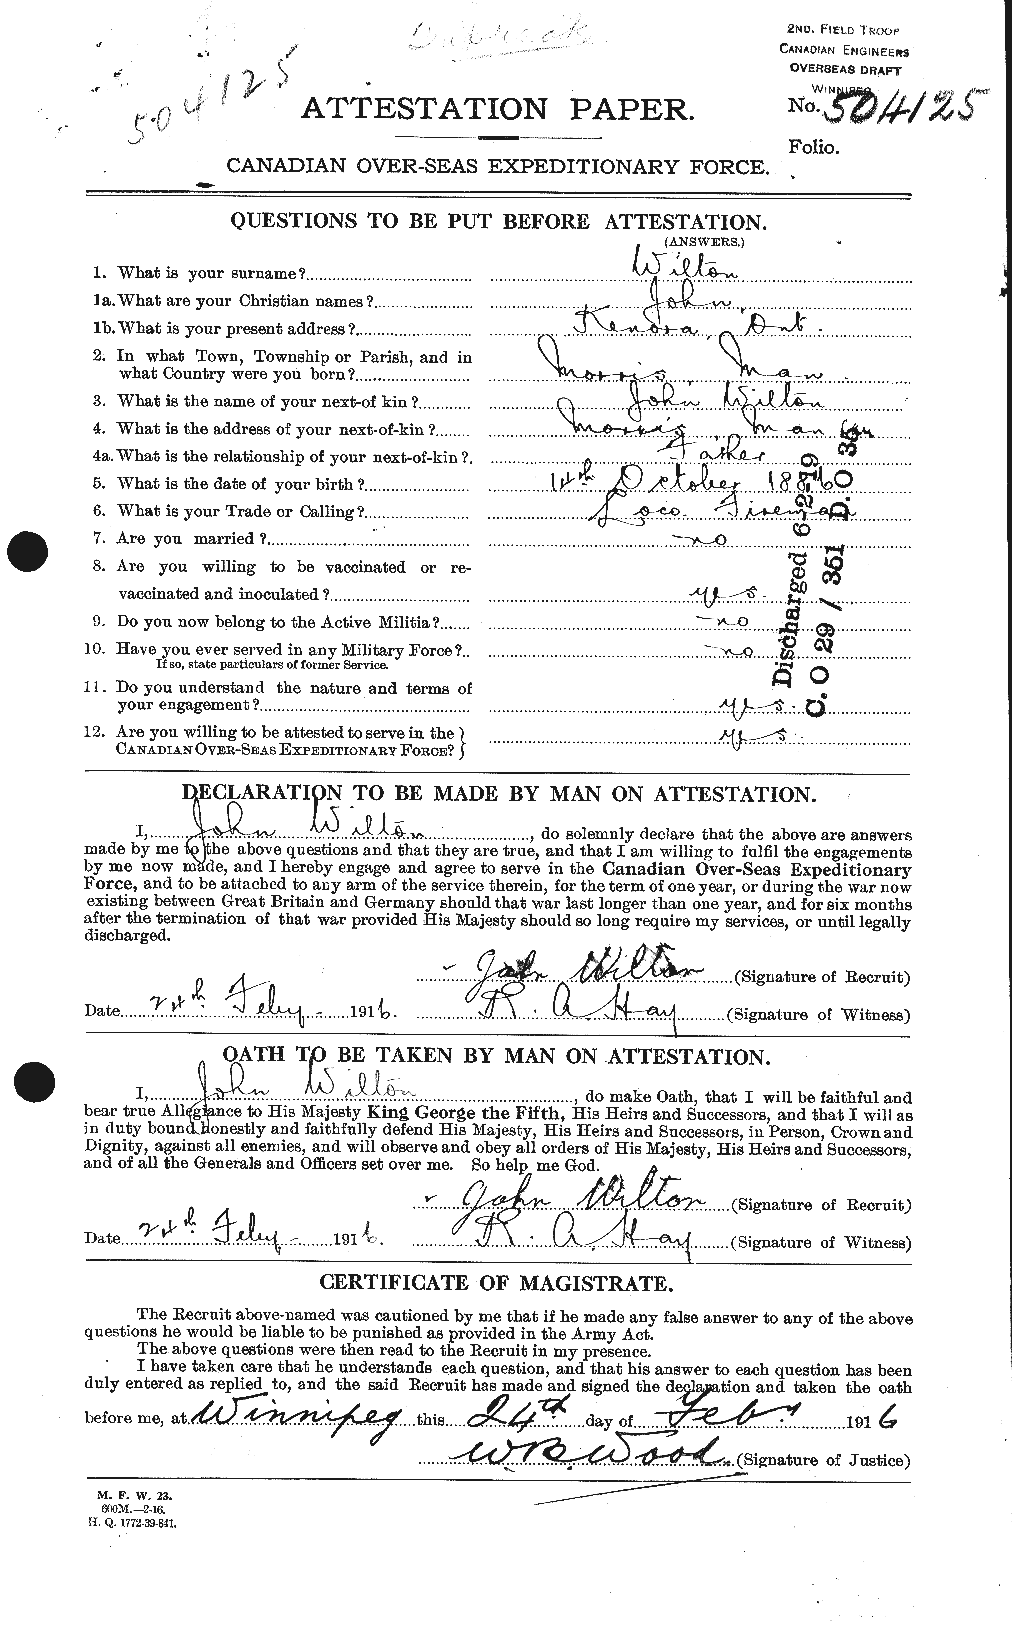 Personnel Records of the First World War - CEF 684165a